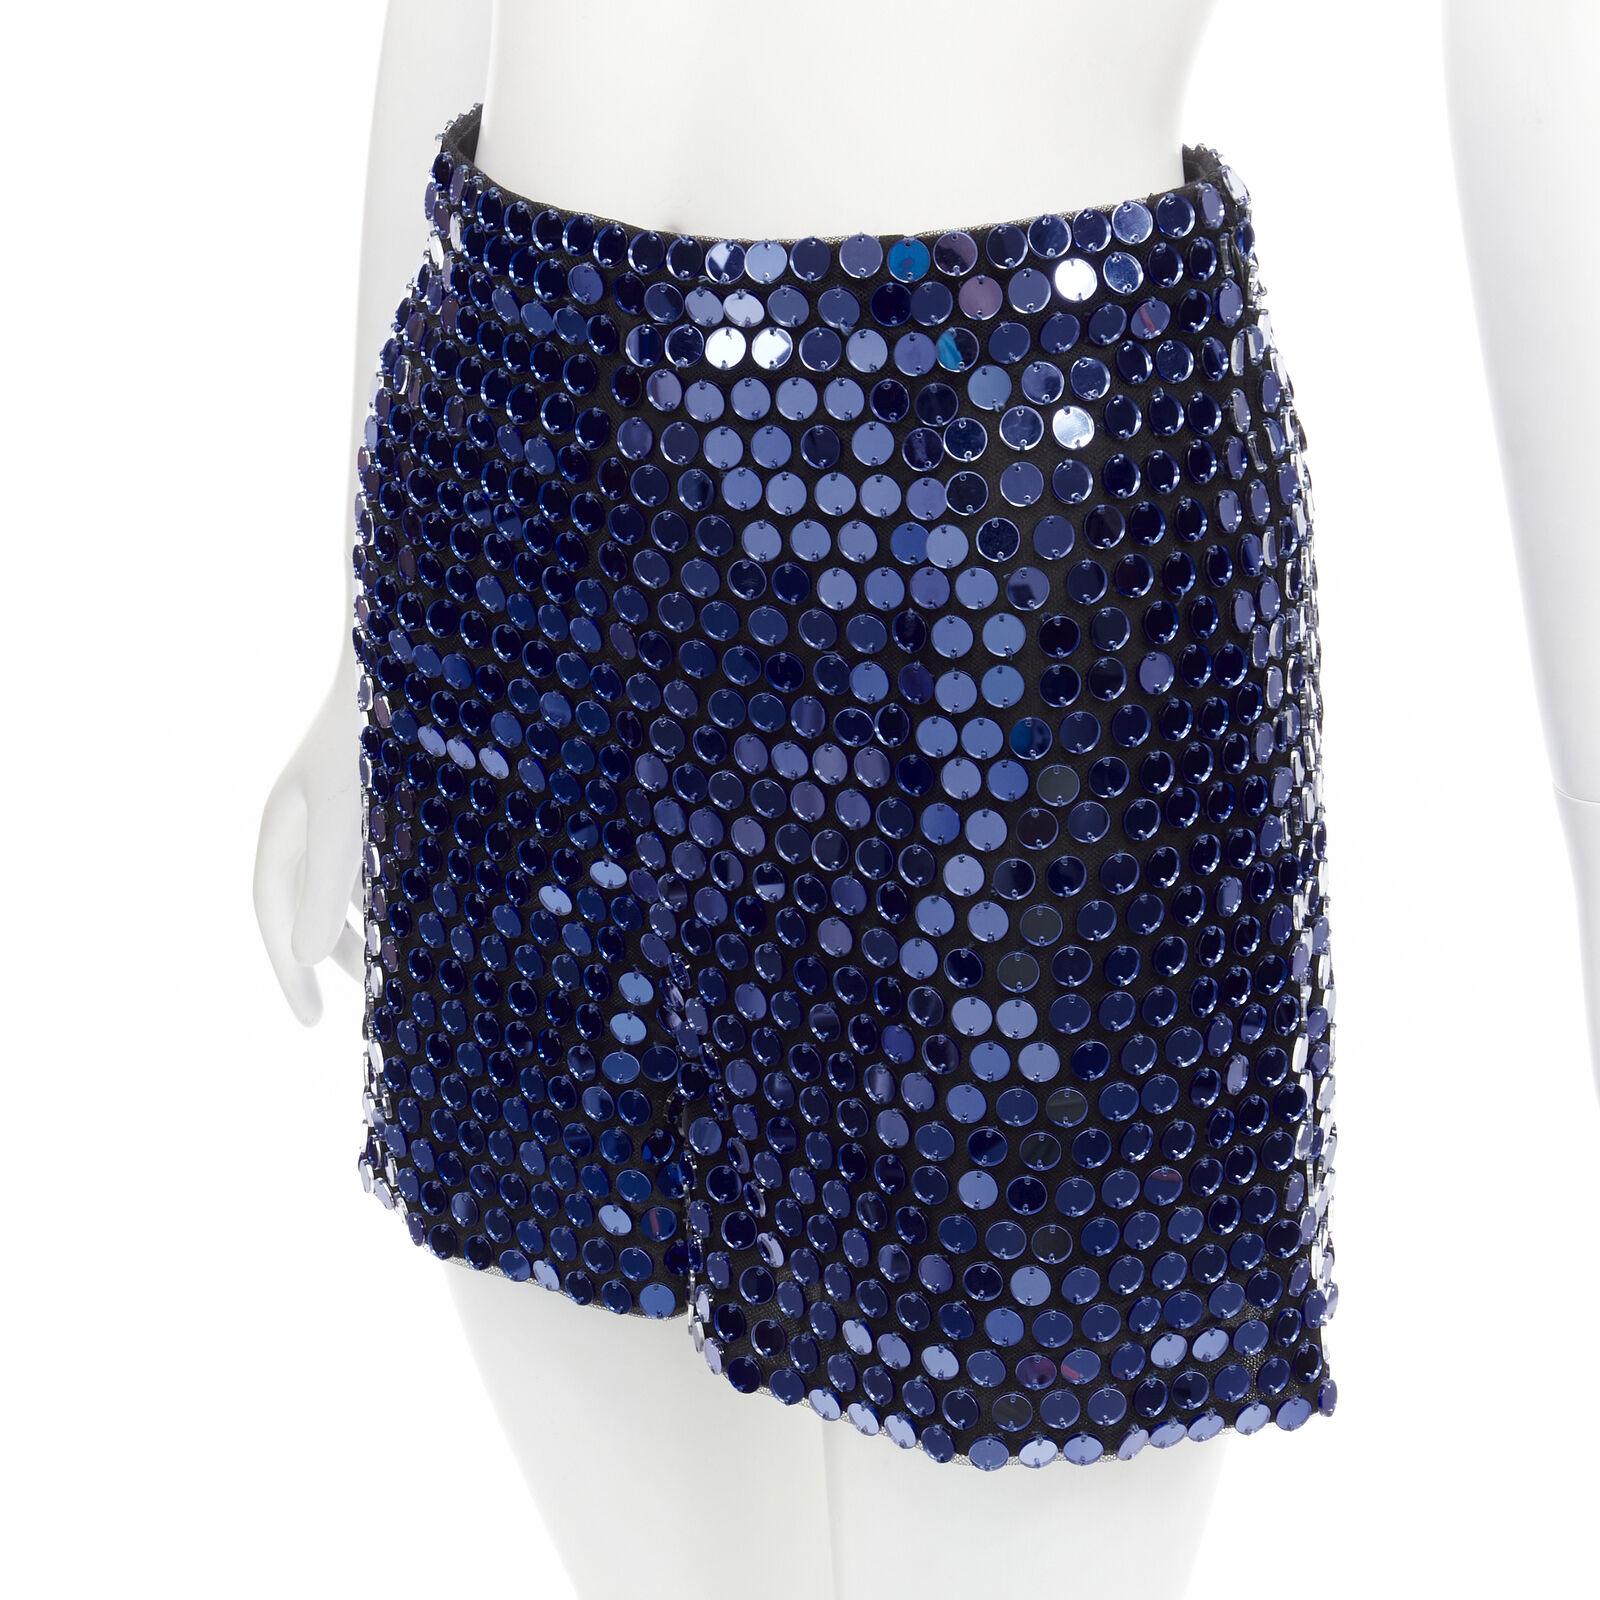 CHRISTIAN DIOR 2021 blue mirrored embellished black high waisted shorts FR34 XS
Reference: AAWC/A00359
Brand: Christian Dior
Designer: Maria Grazia Chiuri
Collection: 2021 - Runway
Material: Polyamide
Color: Blue, Black
Pattern: Sequins
Closure: